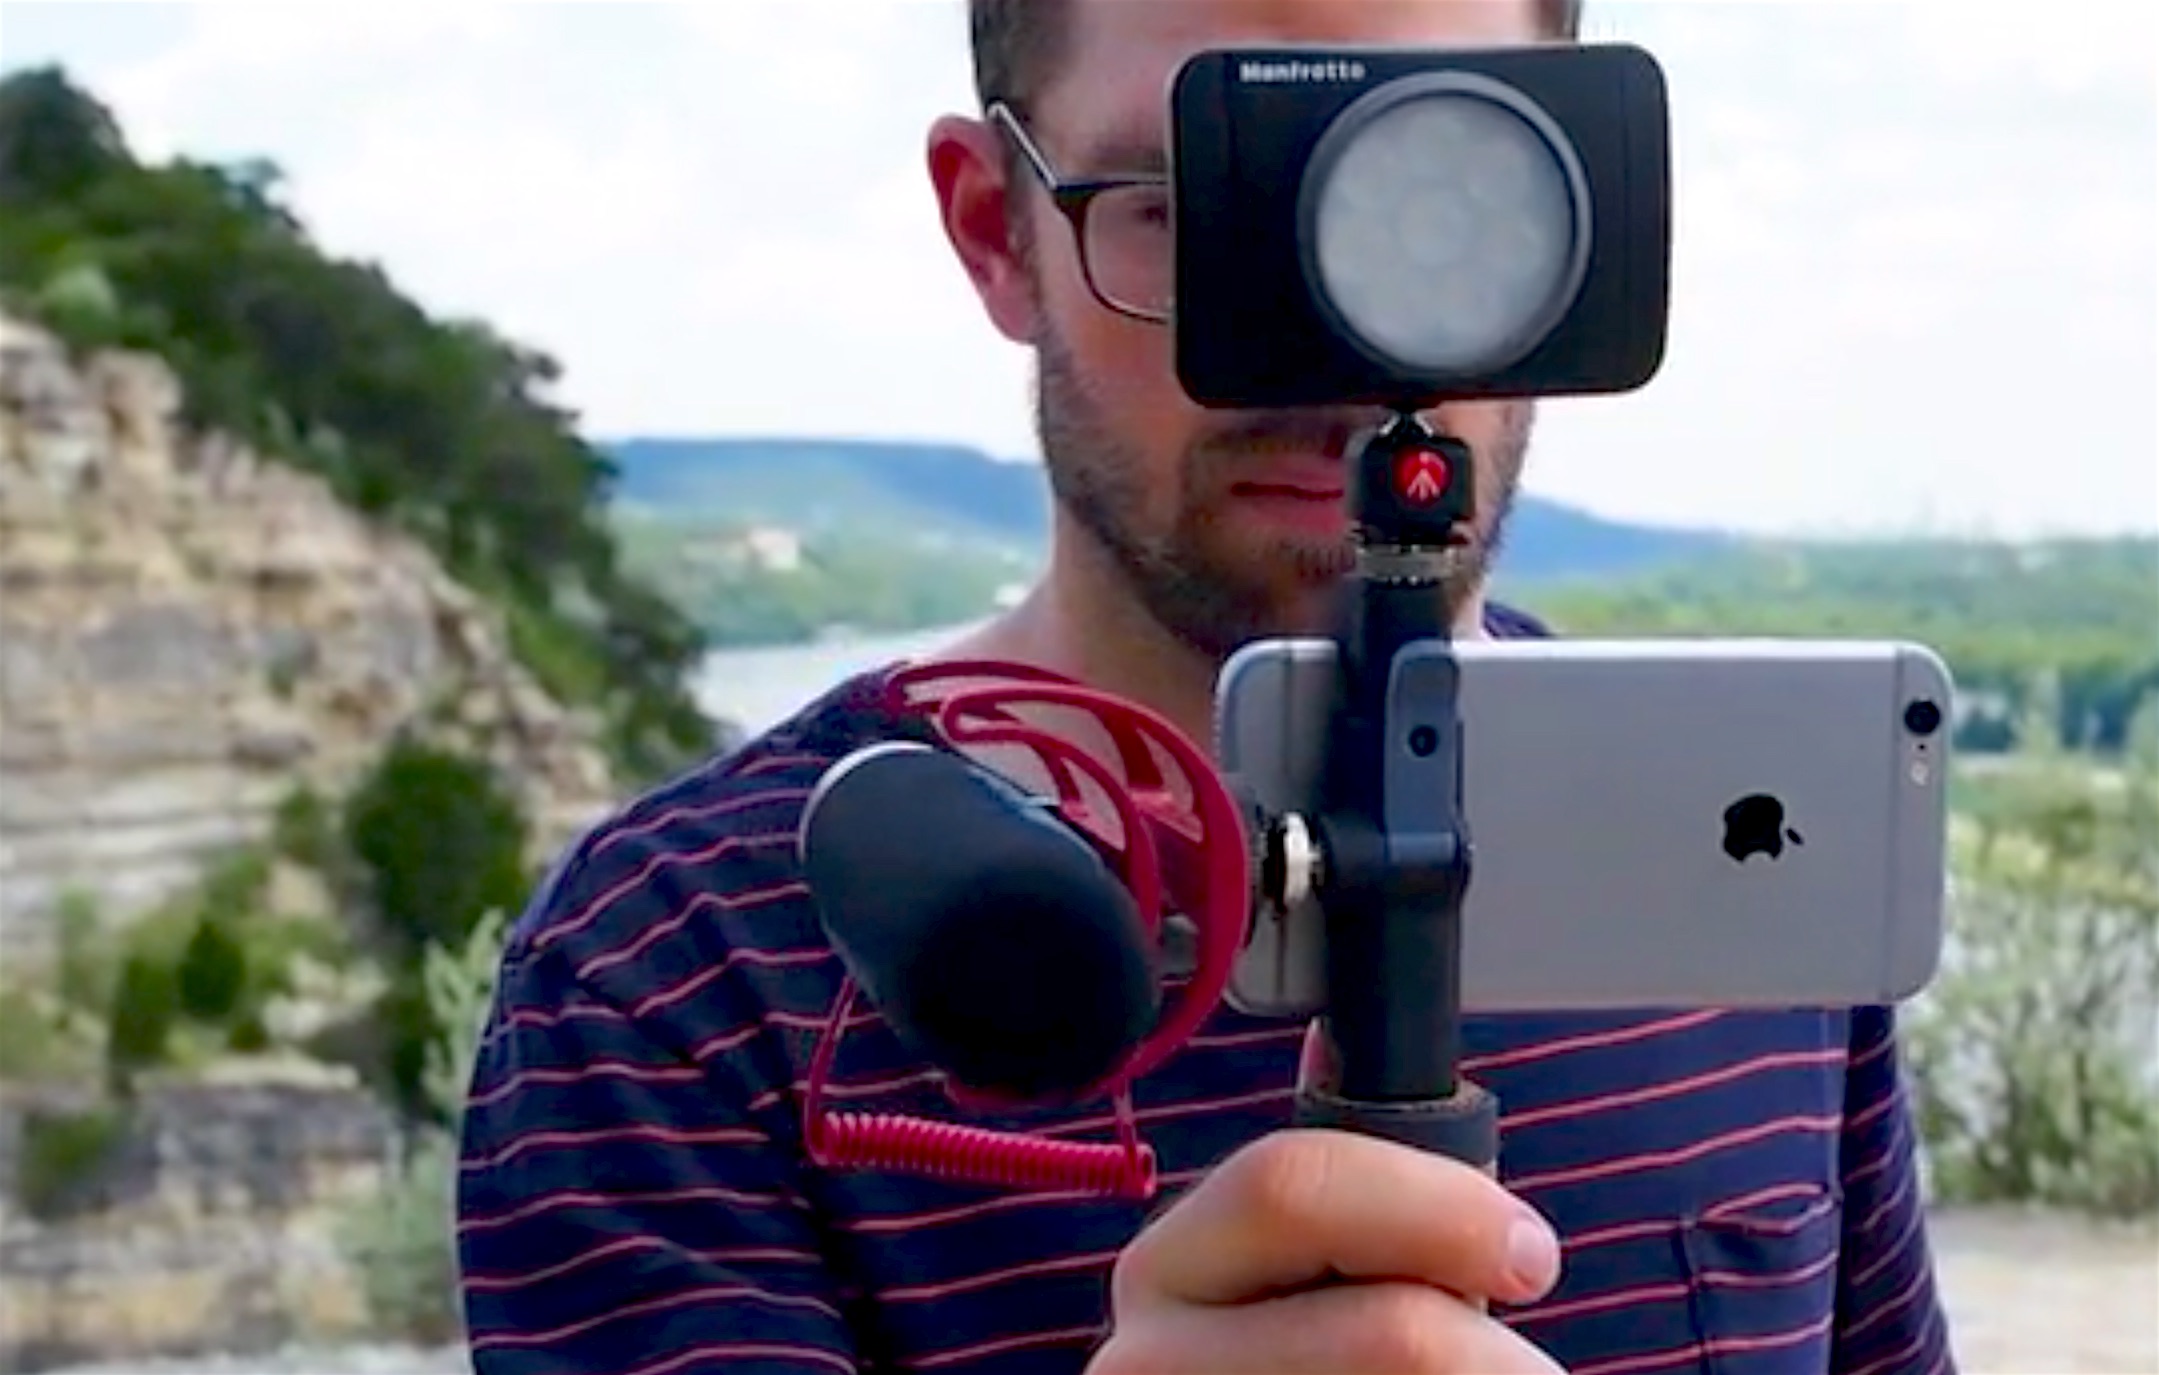 Don't miss this Kickstarter for the #mojo crowd